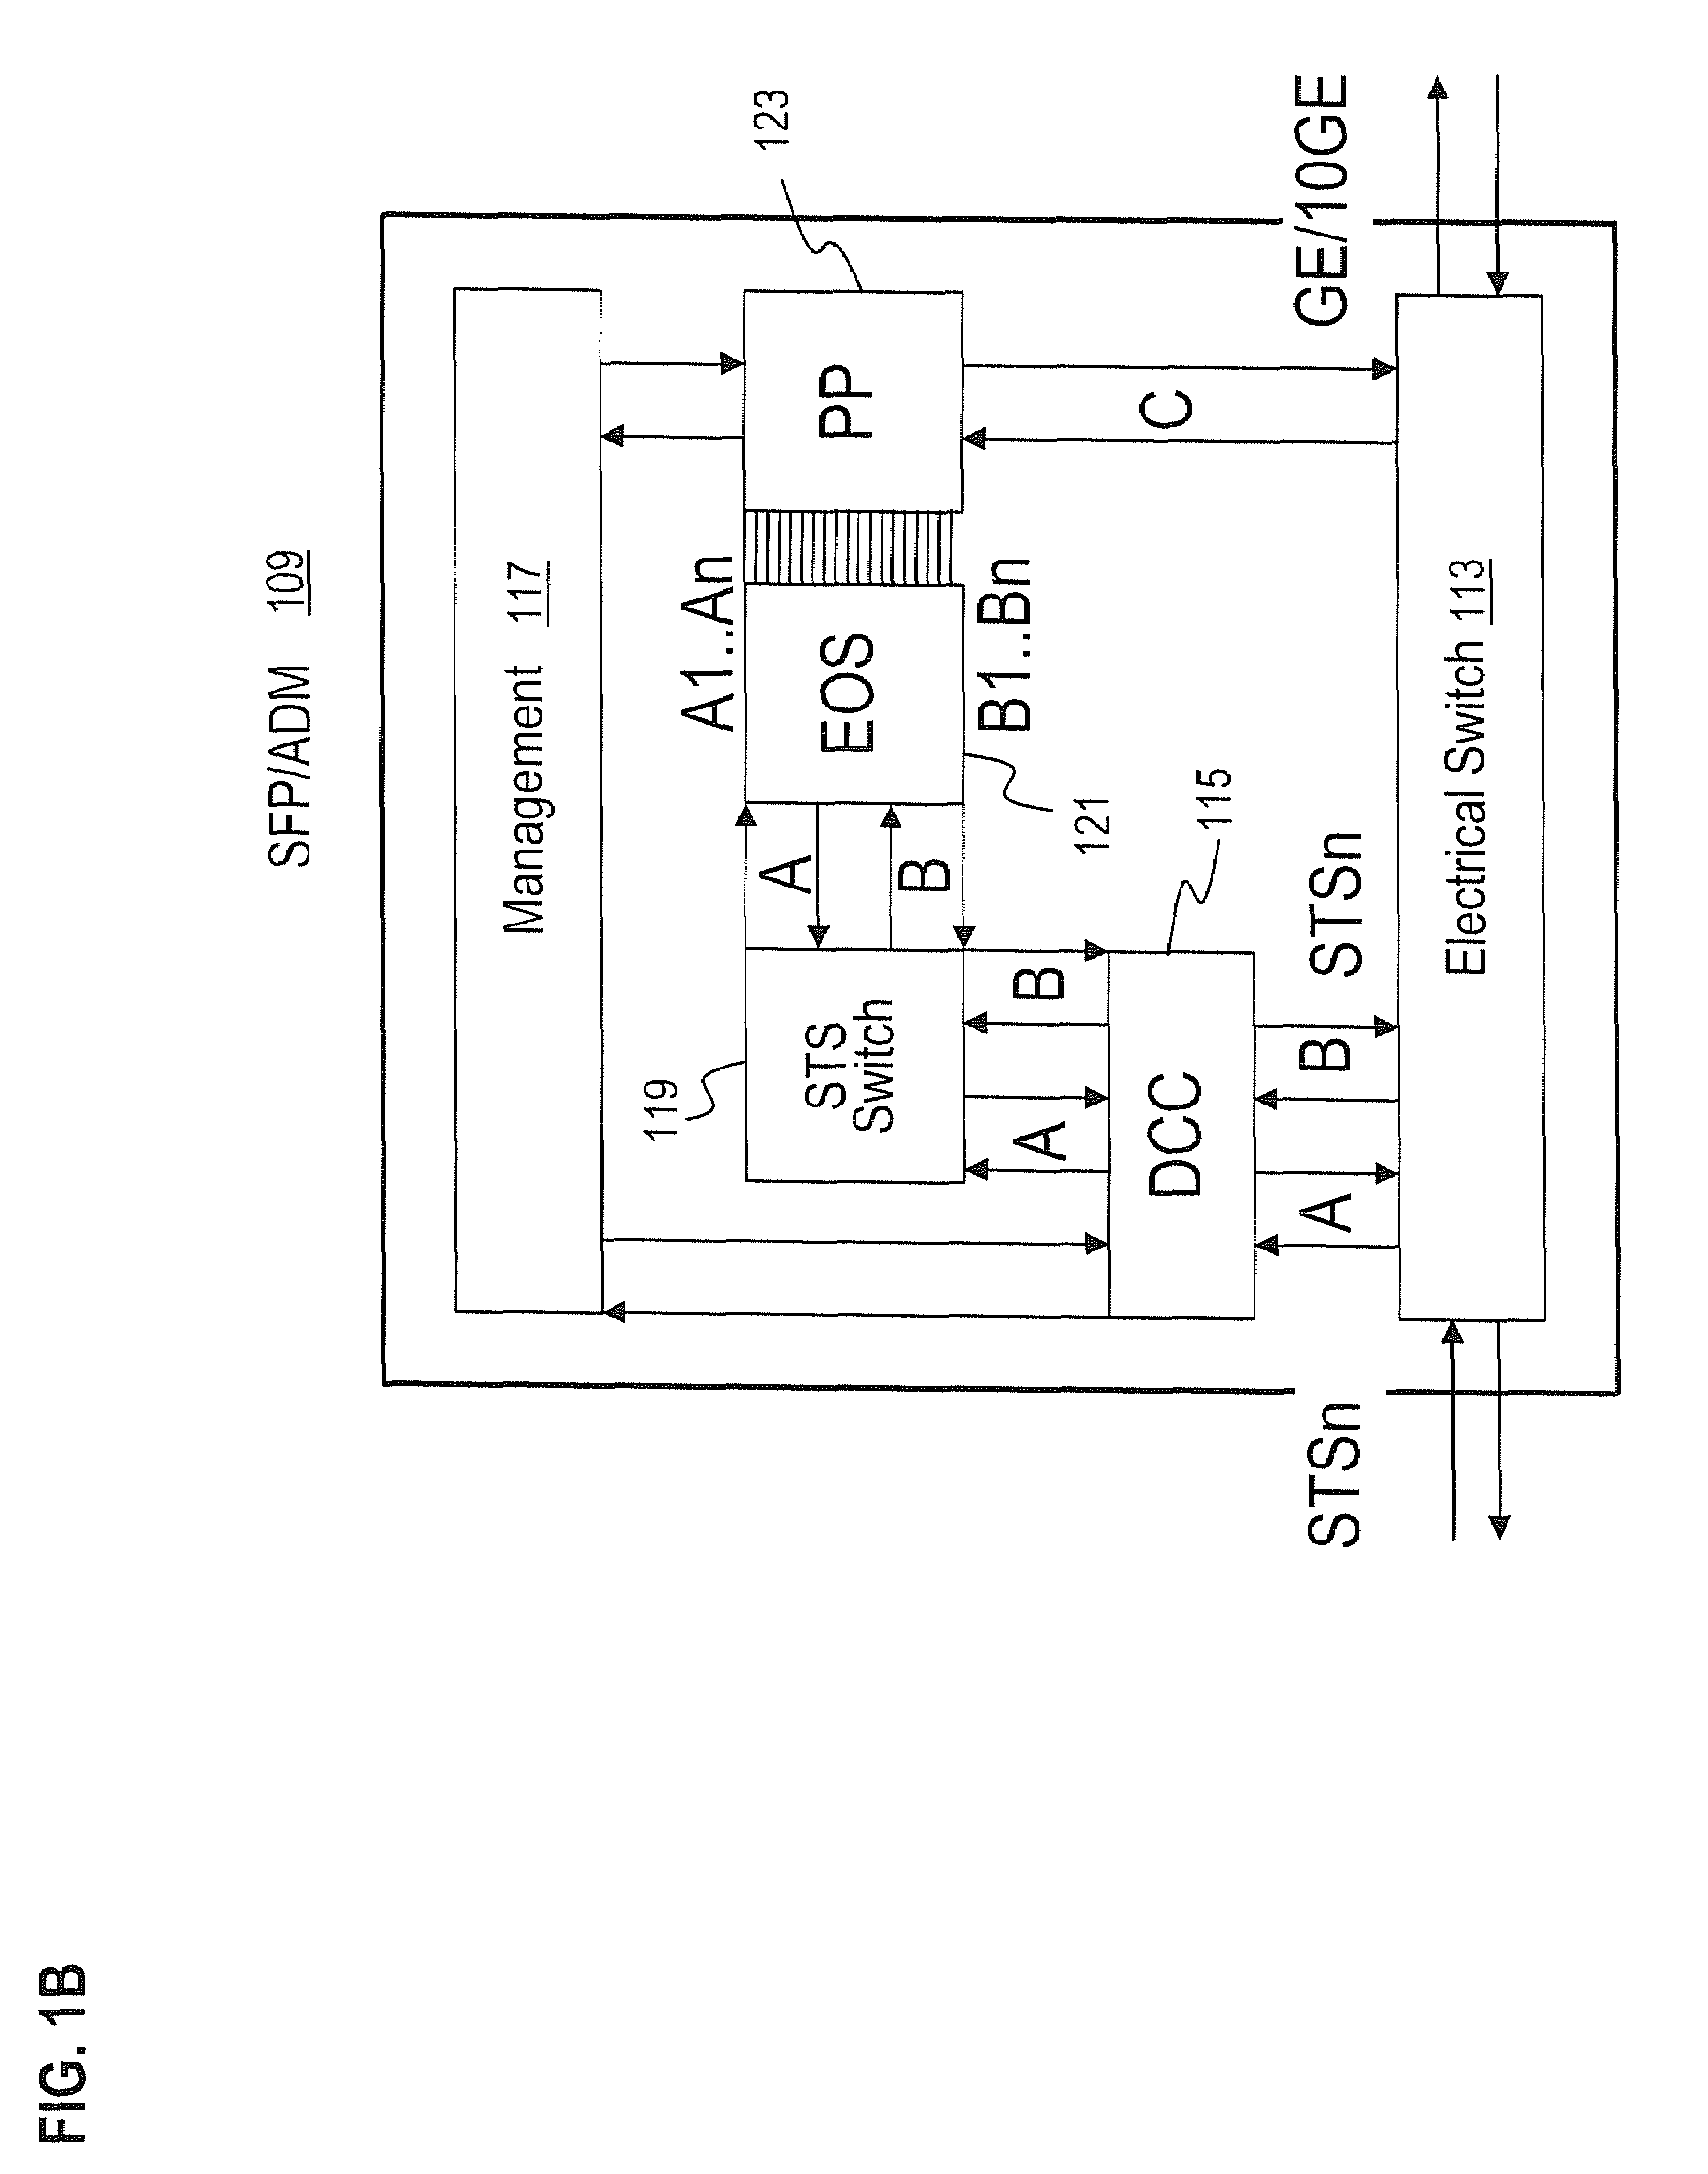 Method and system for managing off-net virtual connections